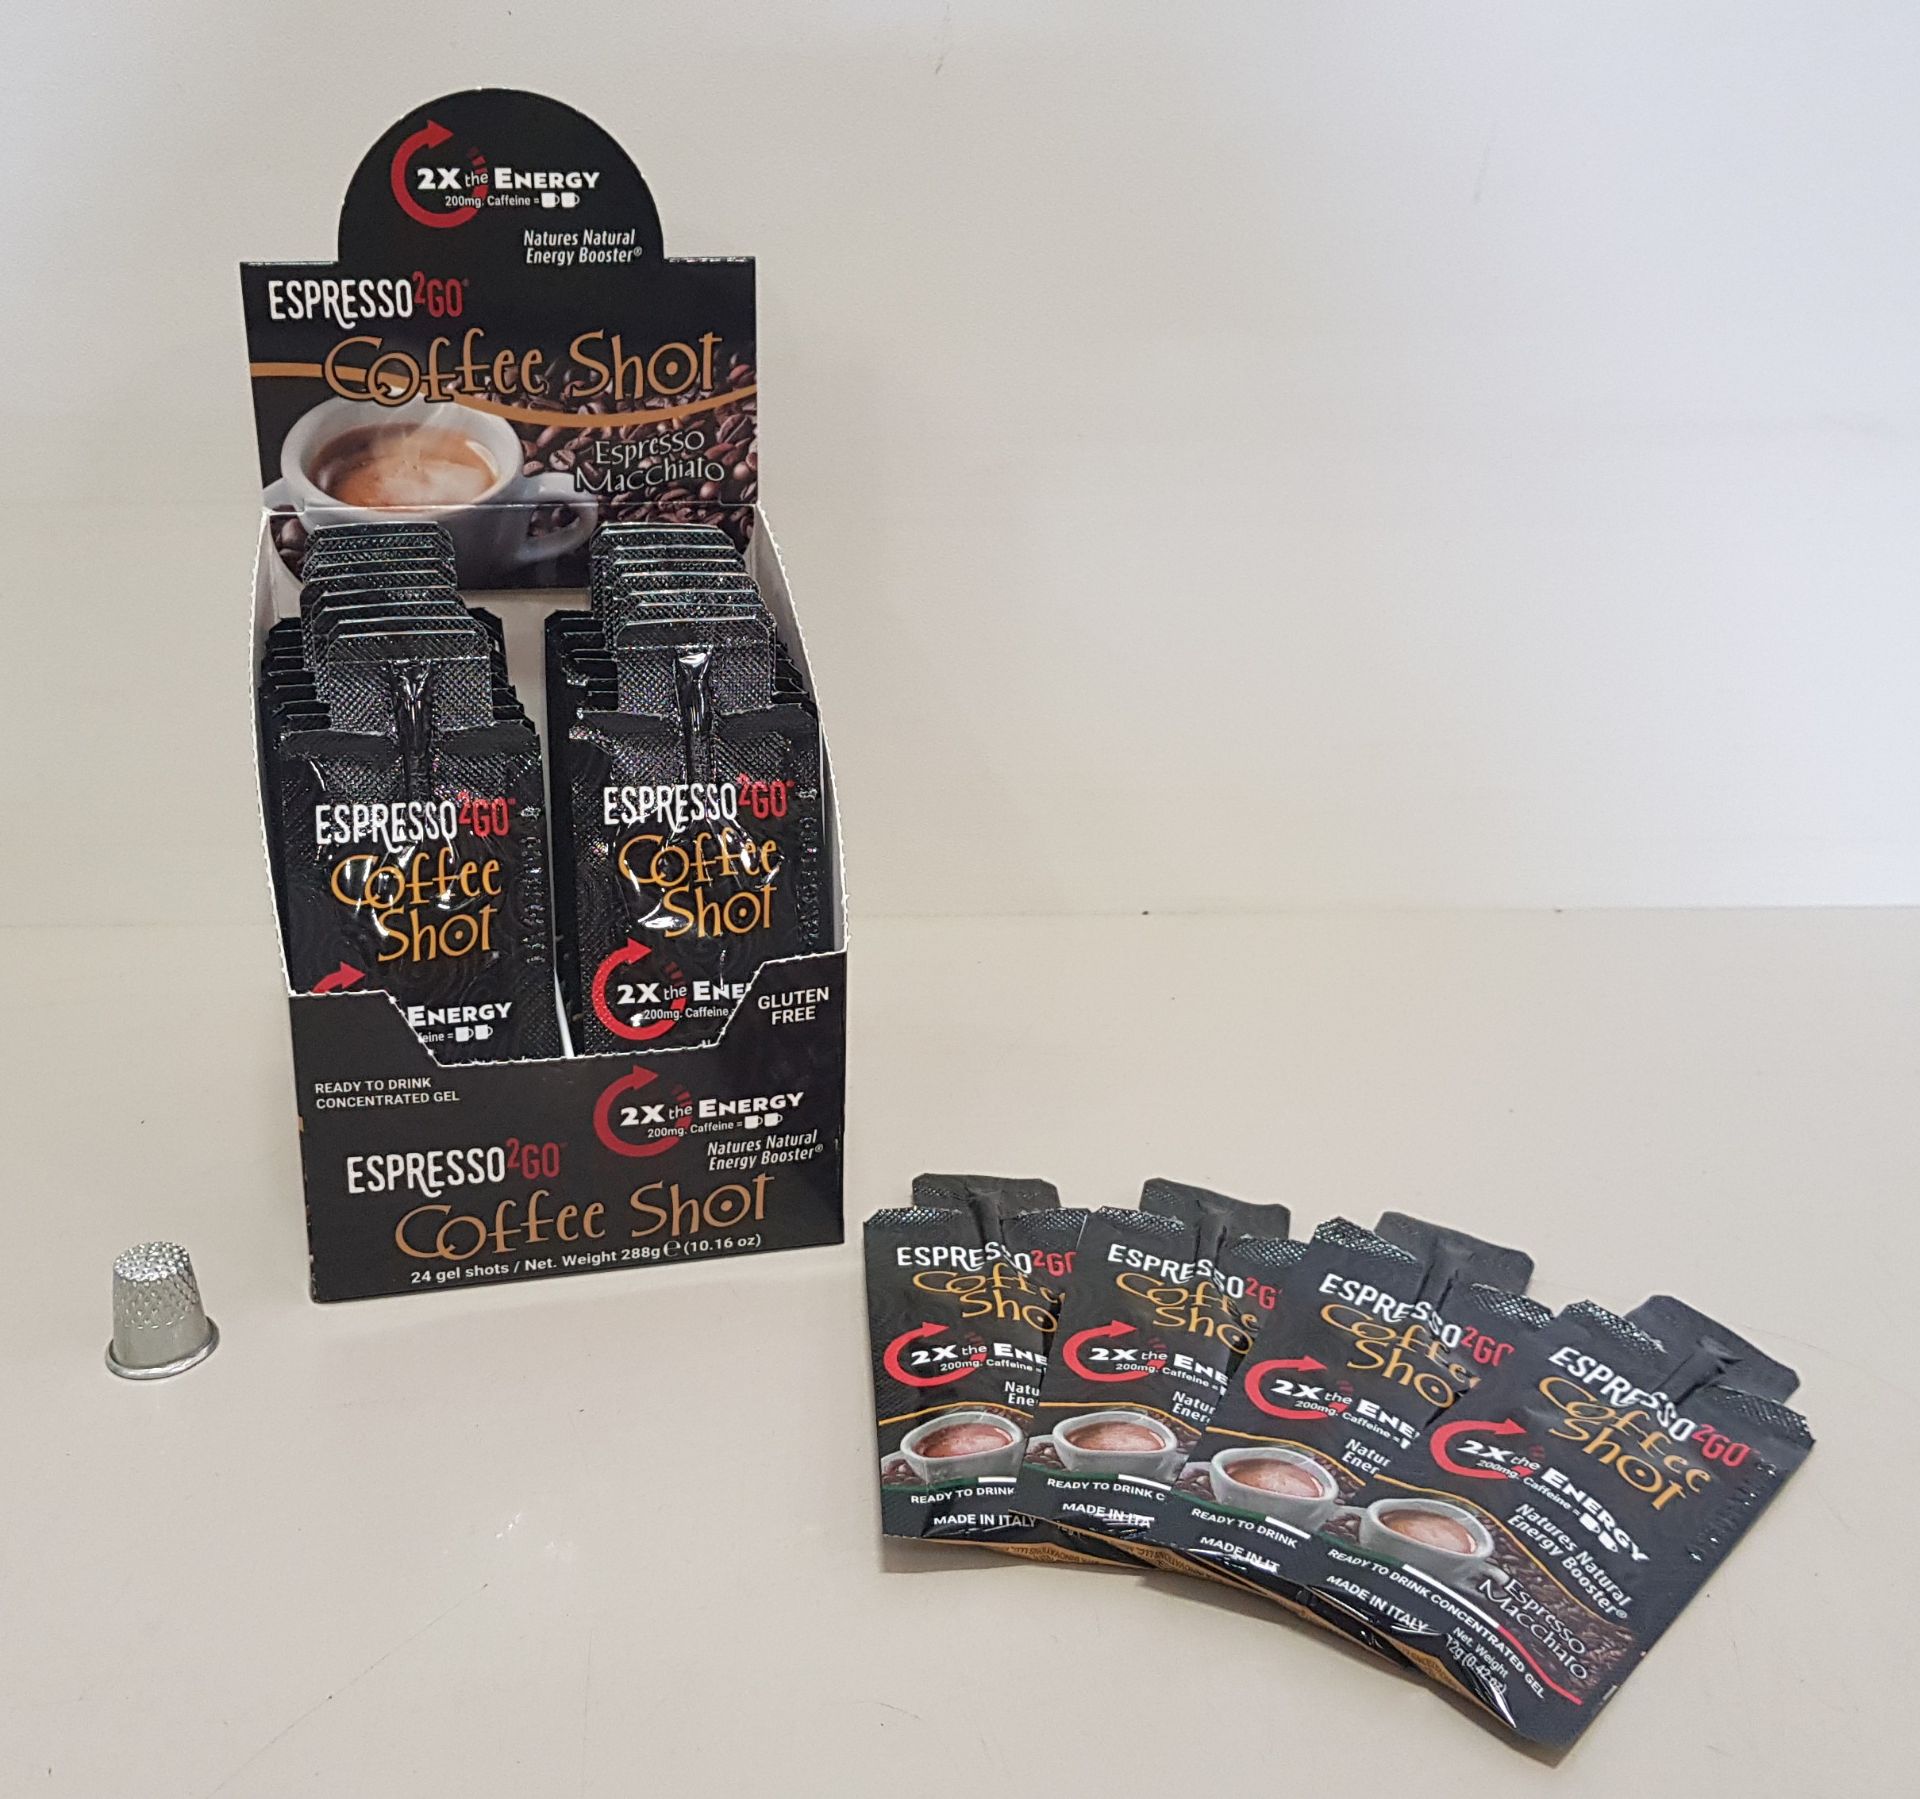 576 X BRAND NEW EXPRESSO TO GO MACCHIATO COFFEE SHOTS 12G IN COUNTER DISPLAY BOXES OF 24 PIECES